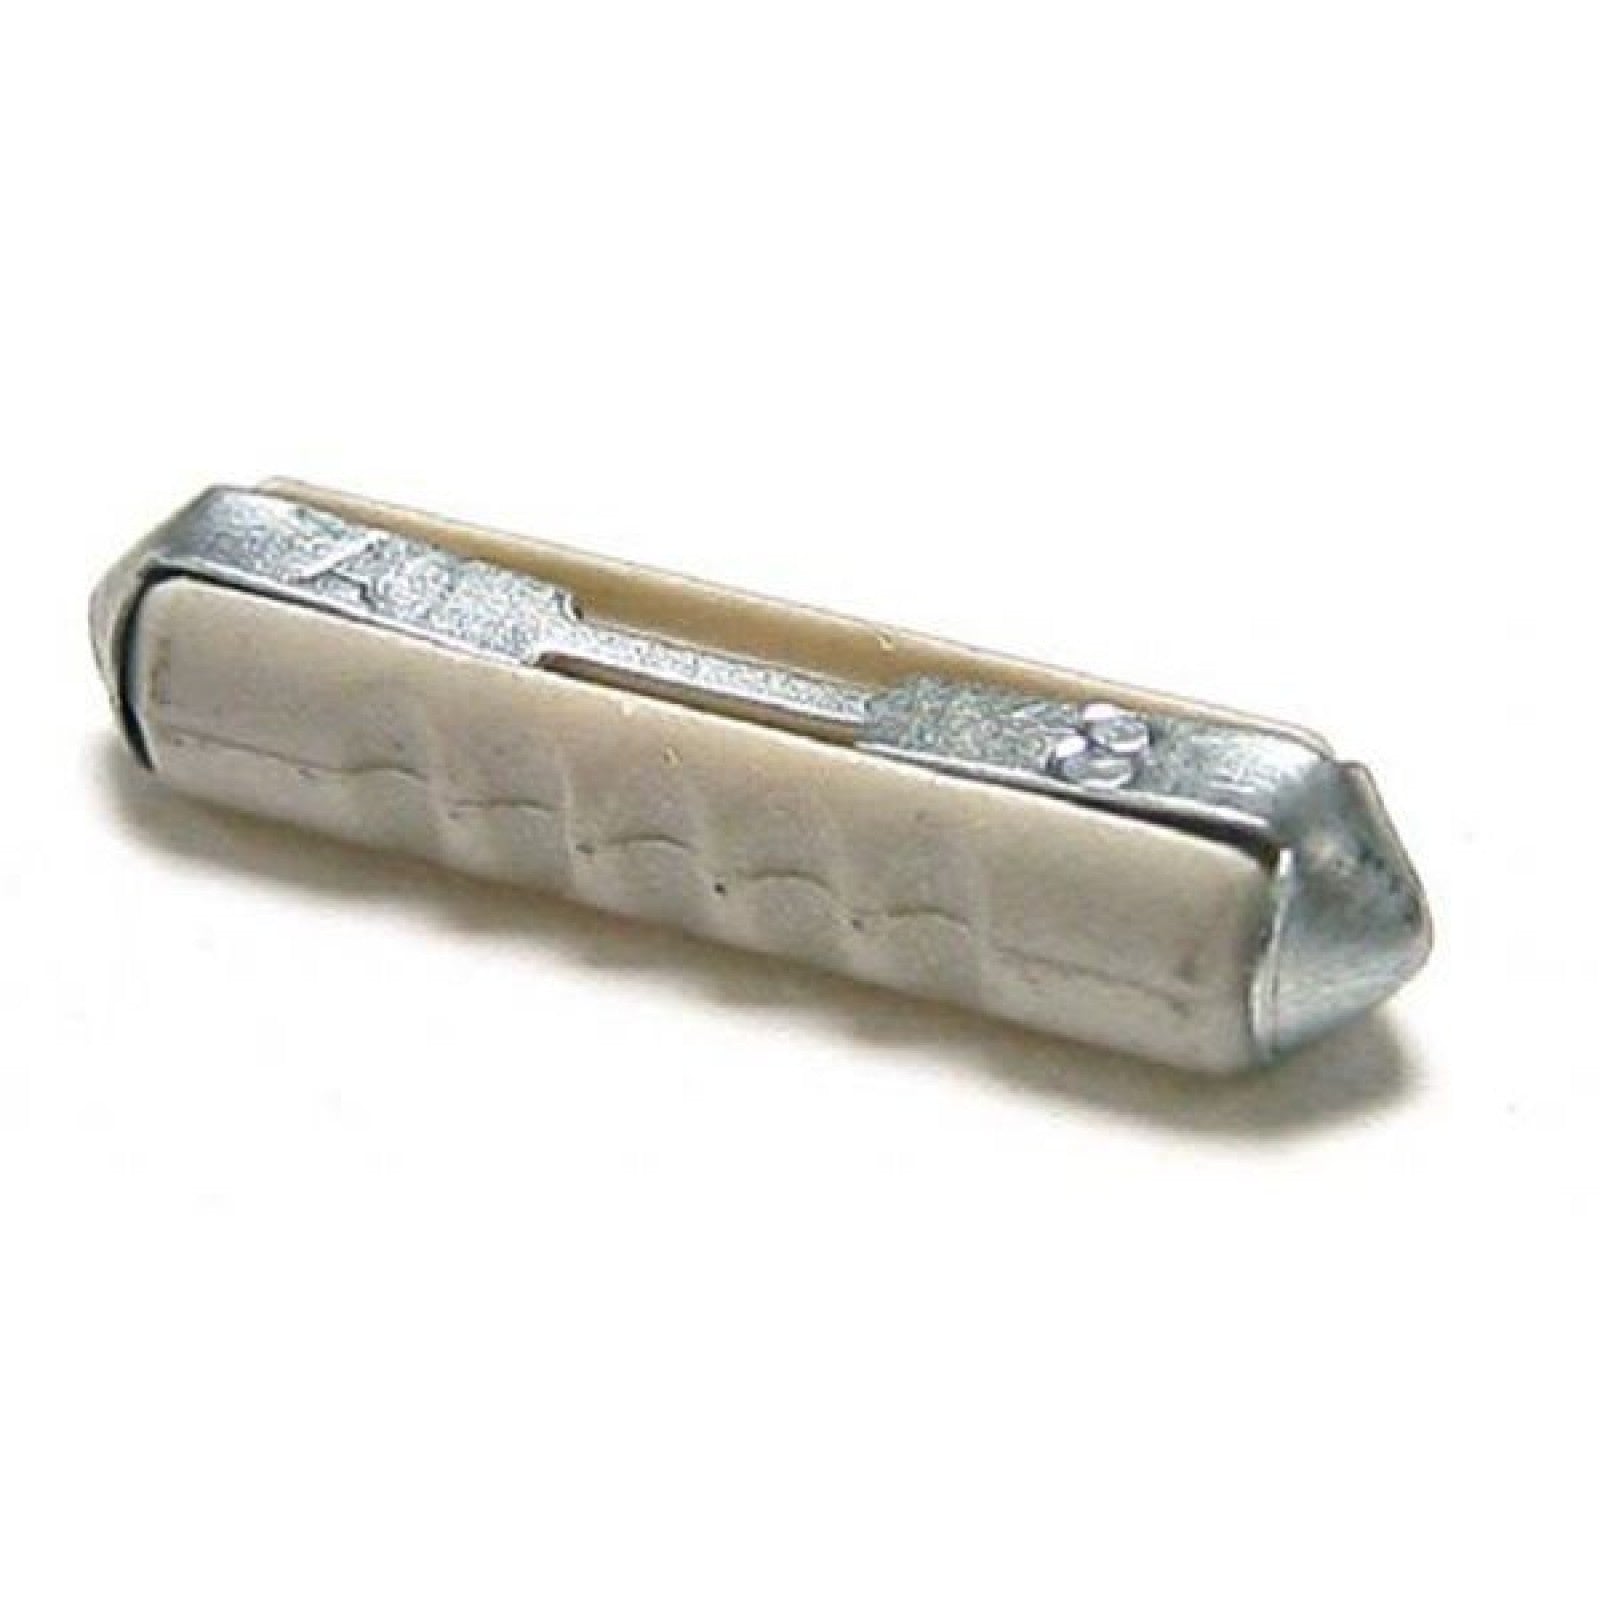 Continental Fuses 8 Amp White | Qty: 50 - 